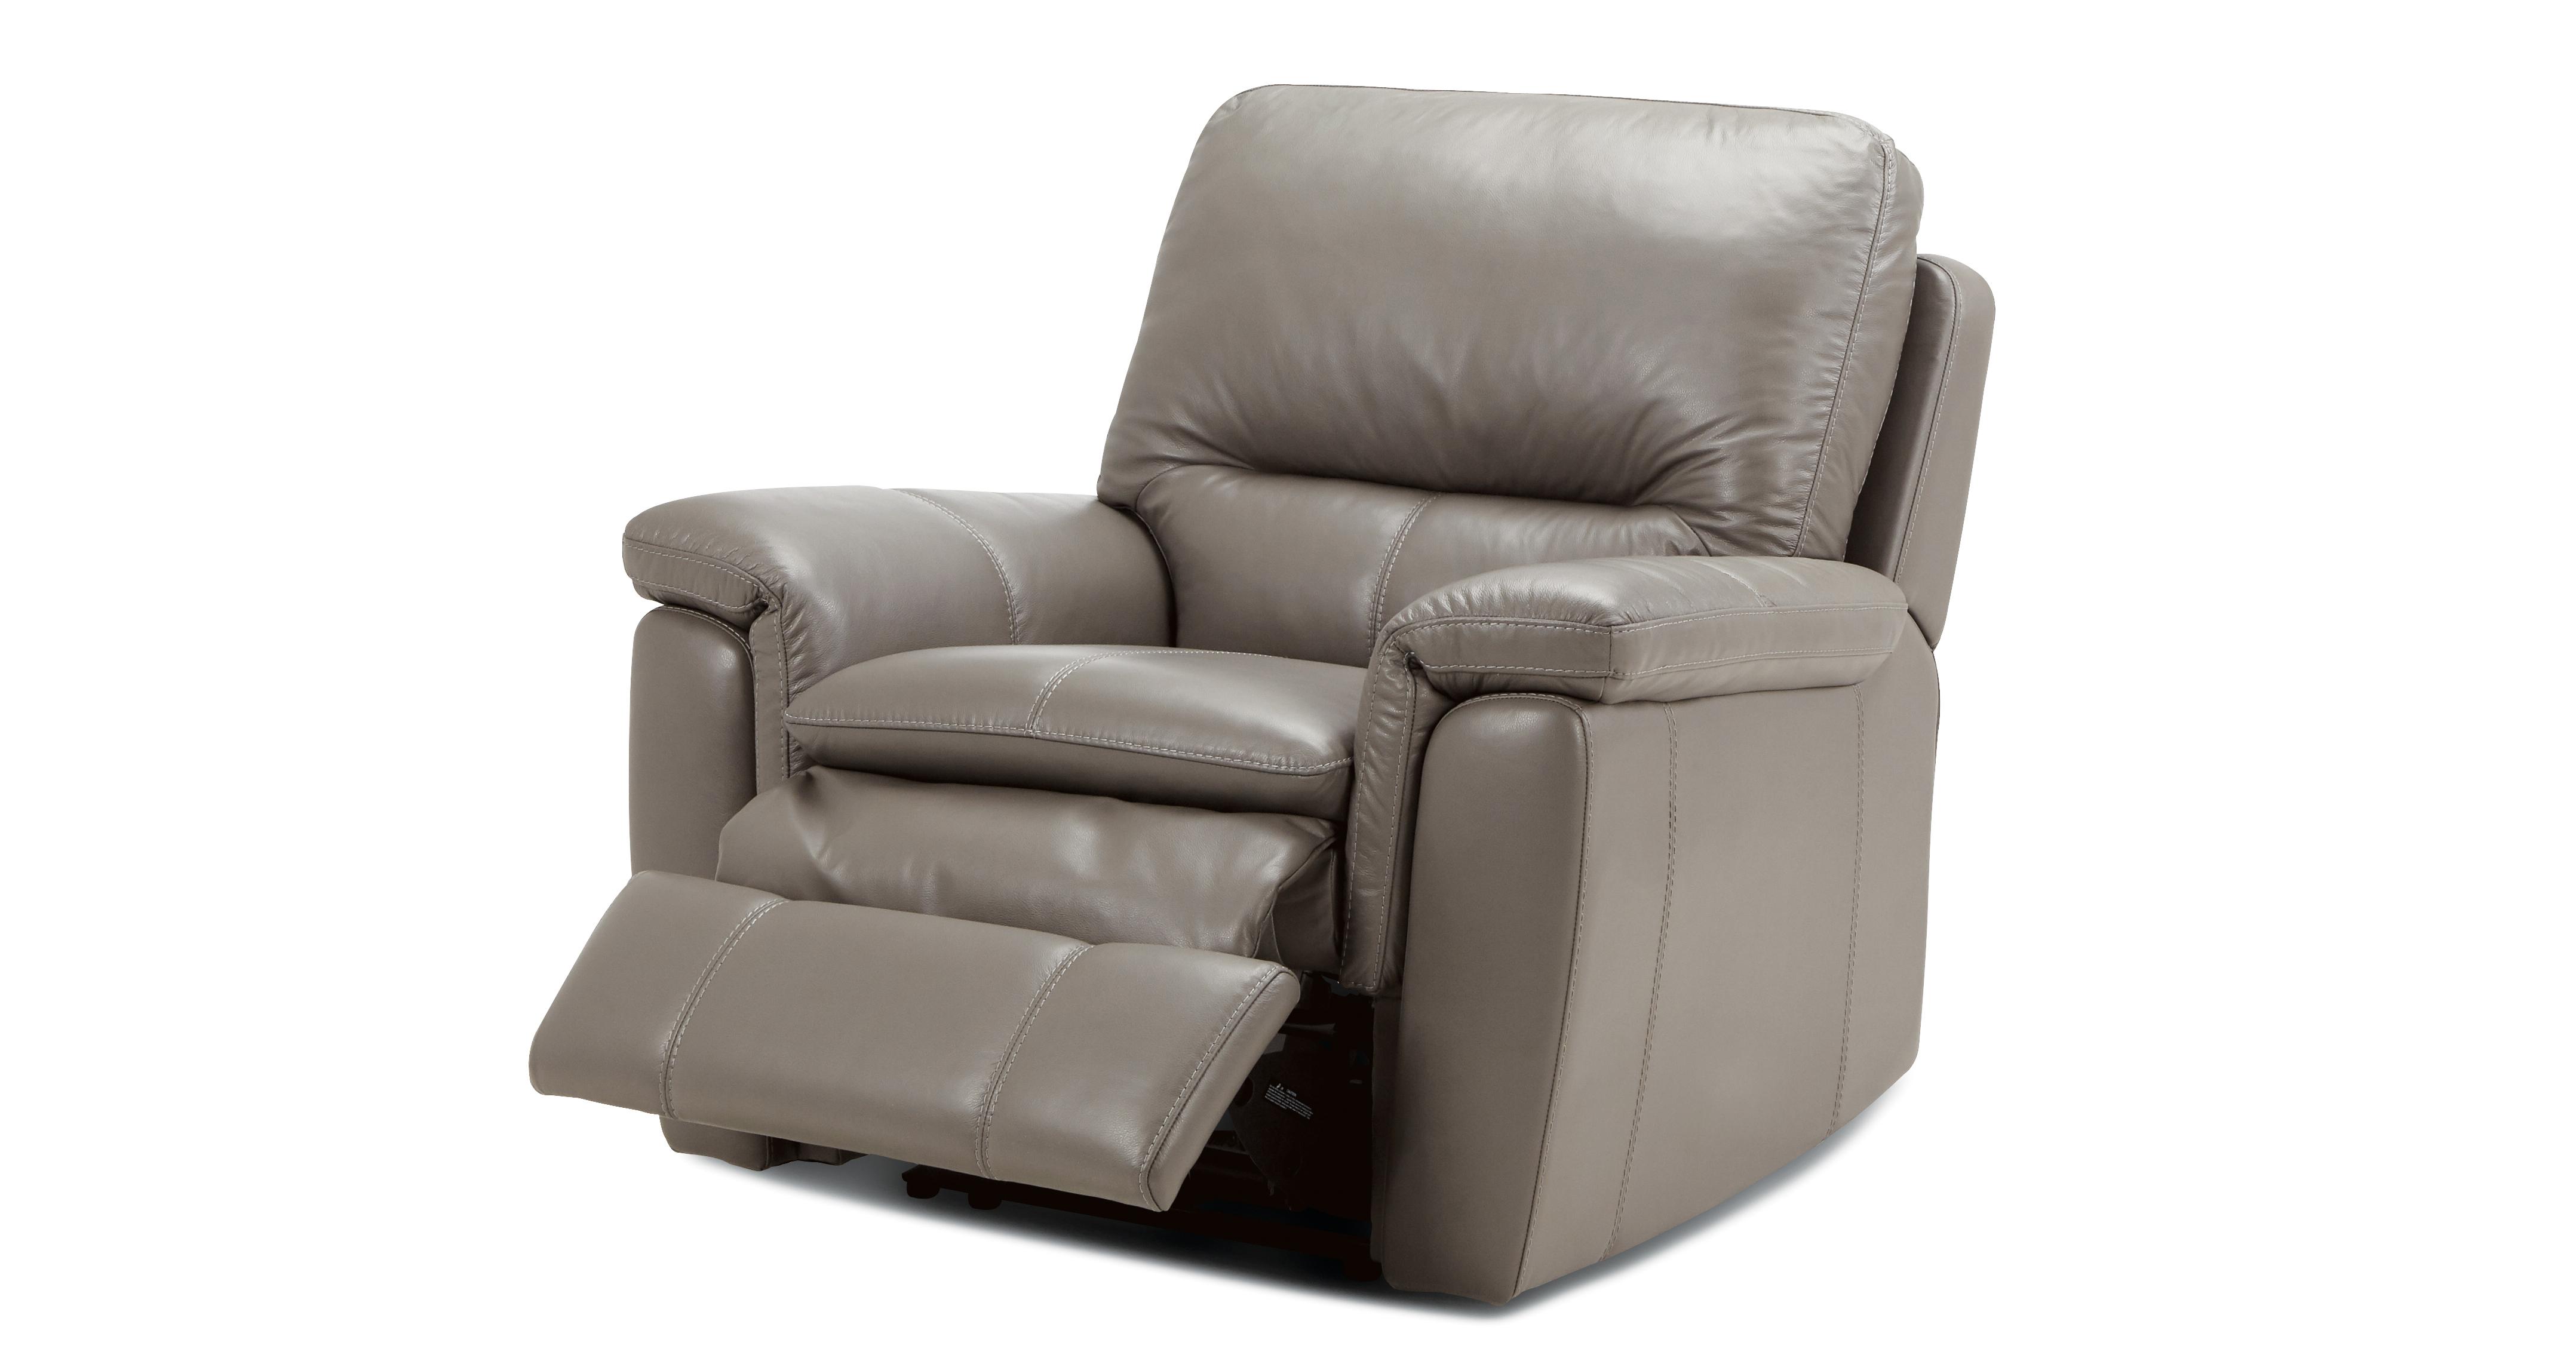 Elm Power Recliner Chair Premium Dfs, Leather Chairs Recliner